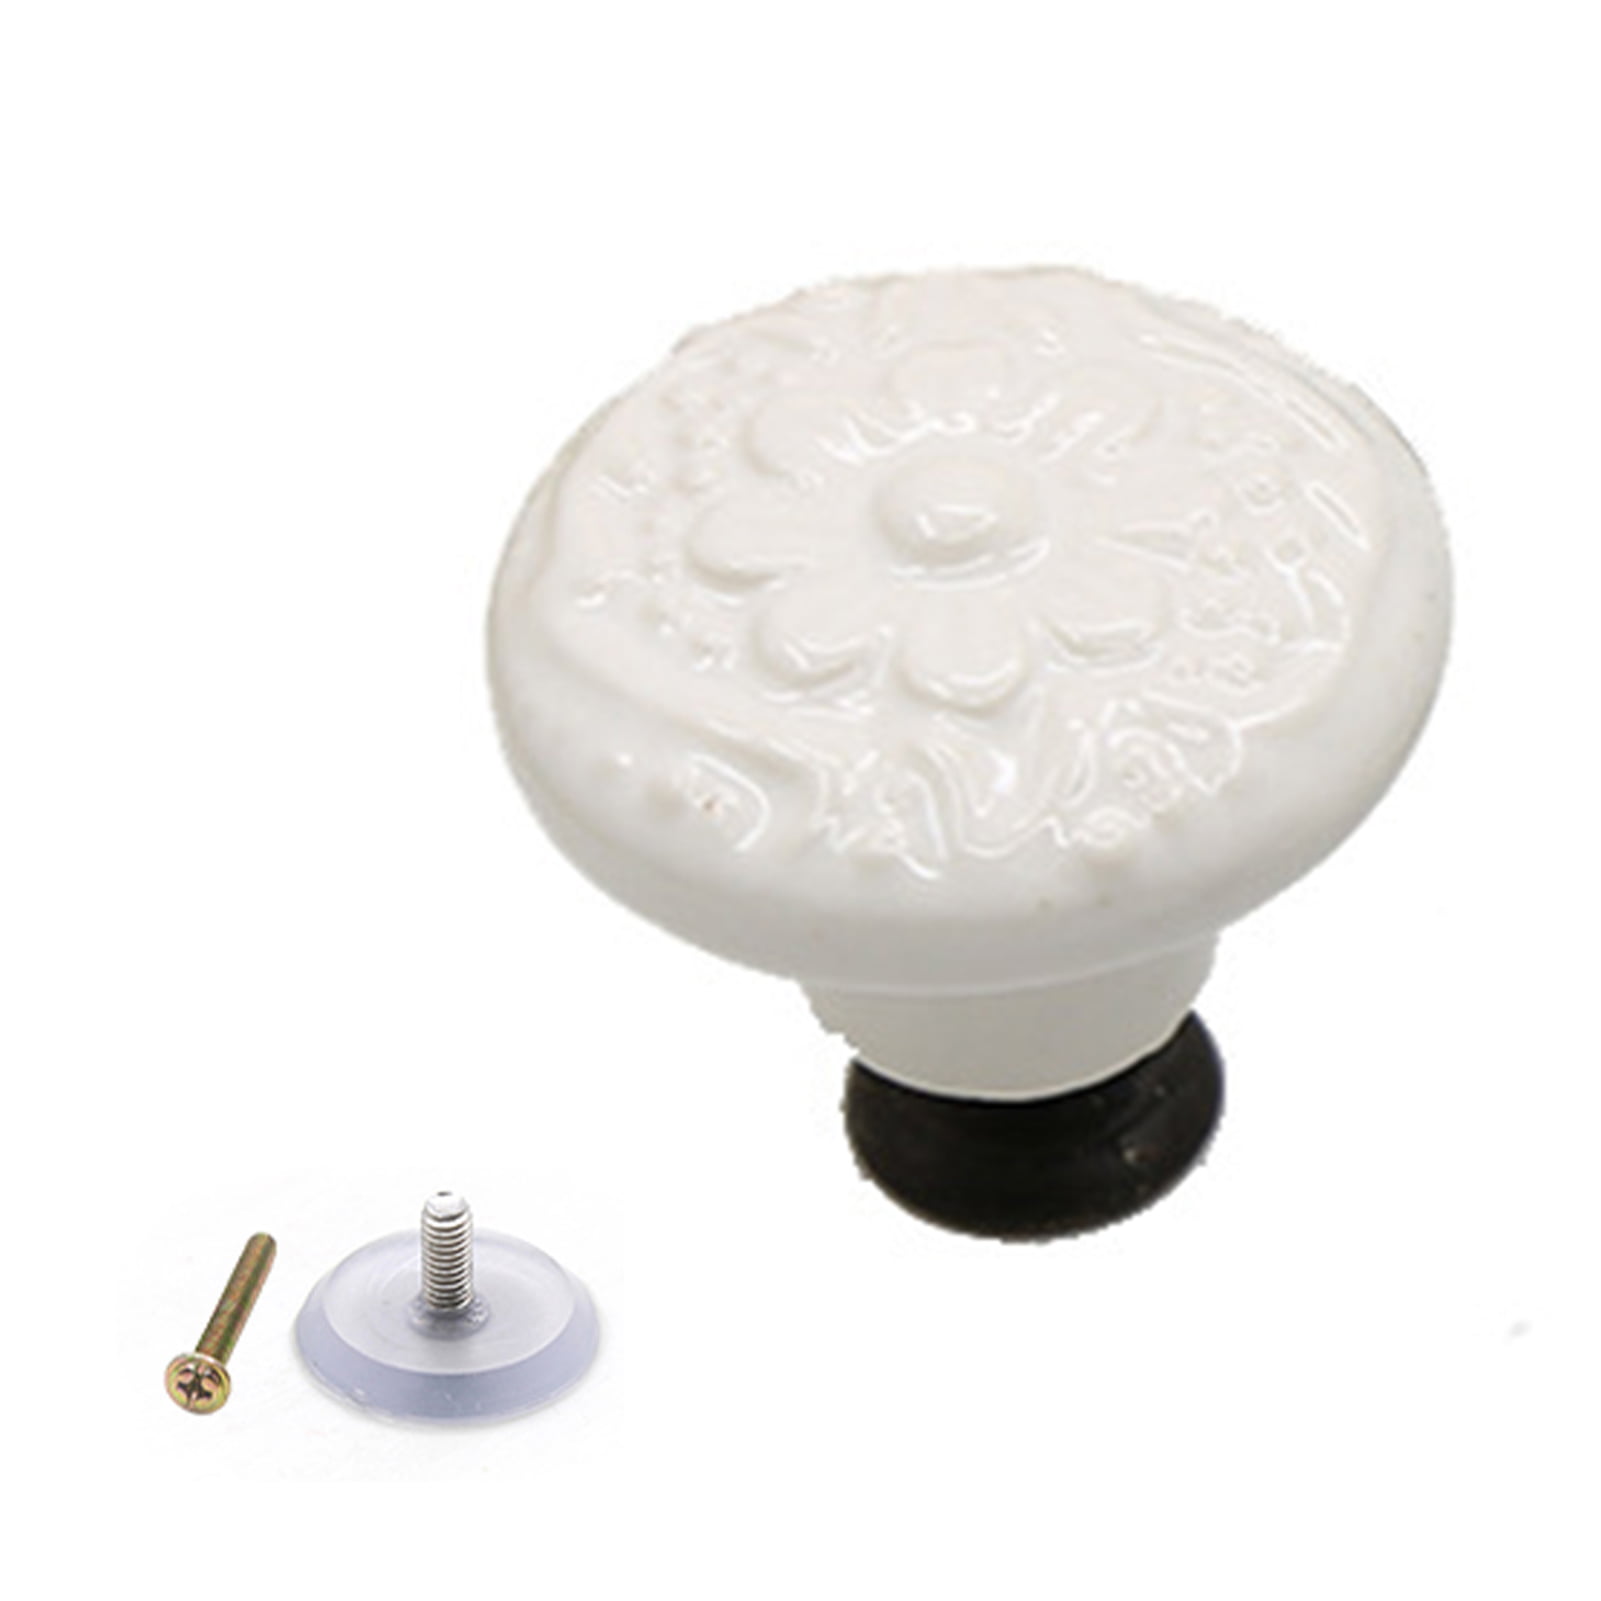 PACK of 10 White 38mm Porcelain Drawer Knobs Supplied with M4*25mm Screws 